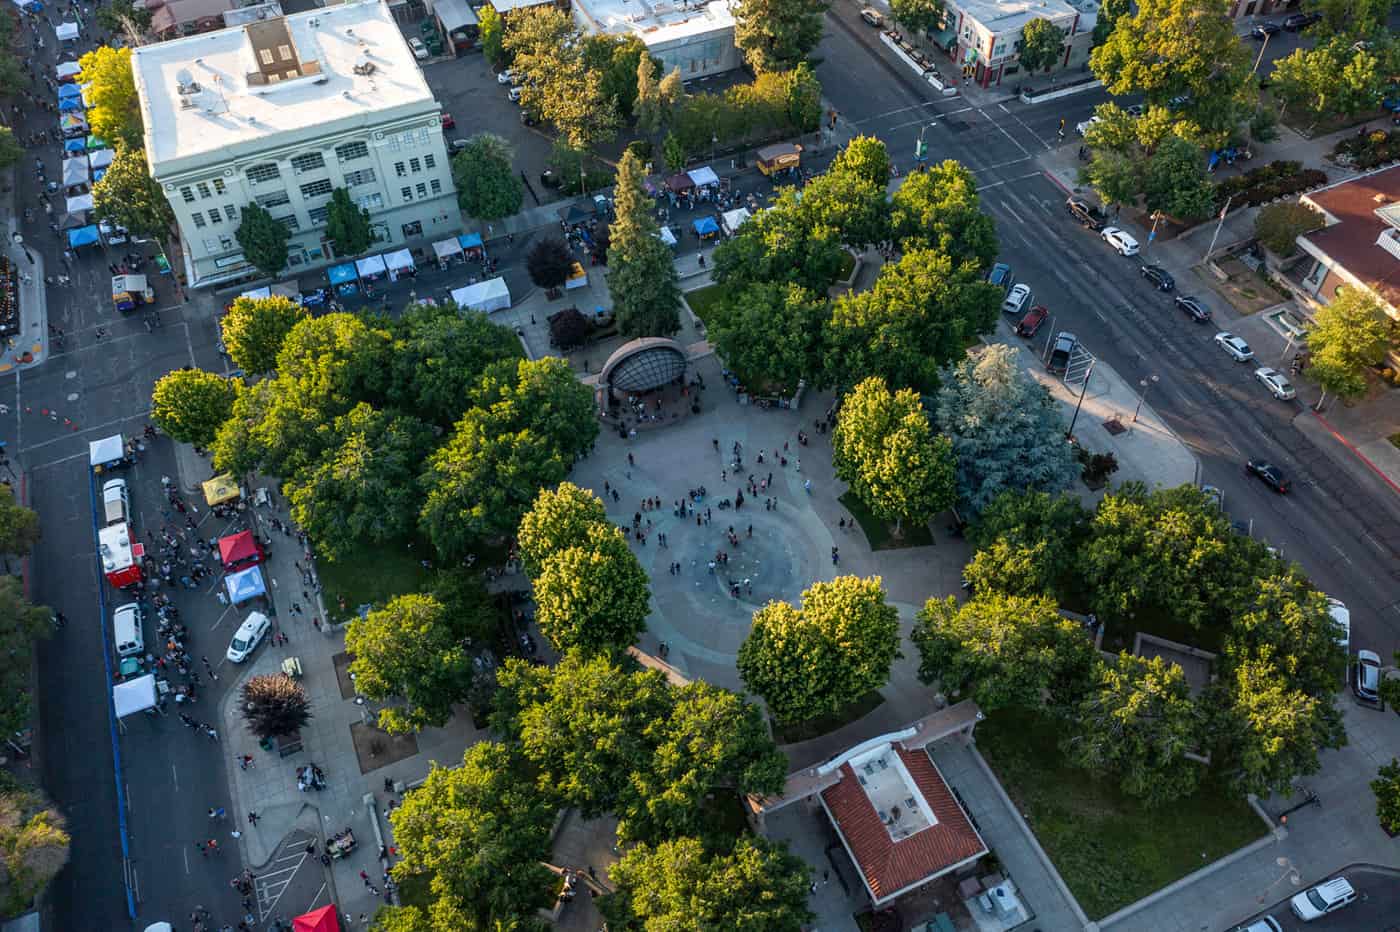 Aerial view of a people-filled Chico City Plaza surrounded by trees and buildings